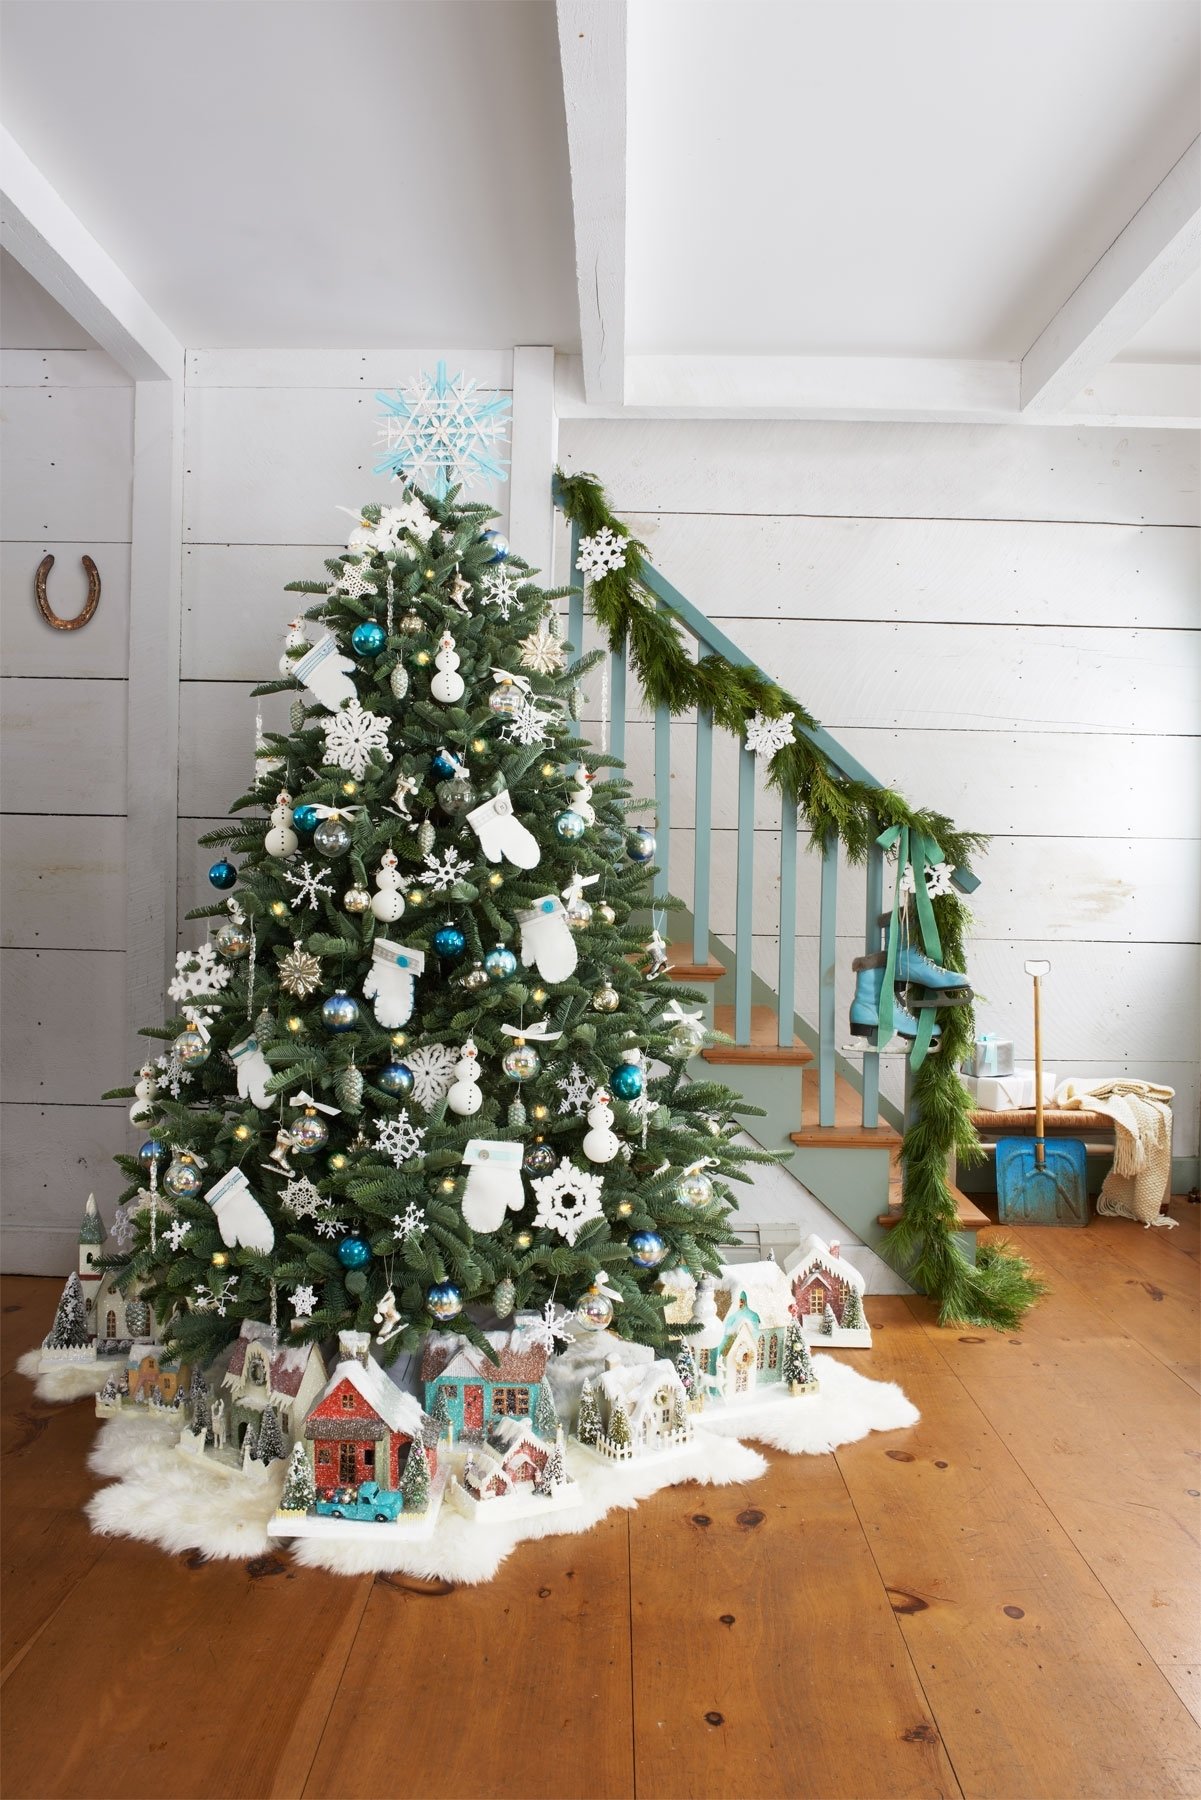 10 Perfect Decorating A Christmas Tree Ideas 60 christmas tree decorating ideas how to decorate a loversiq 2022